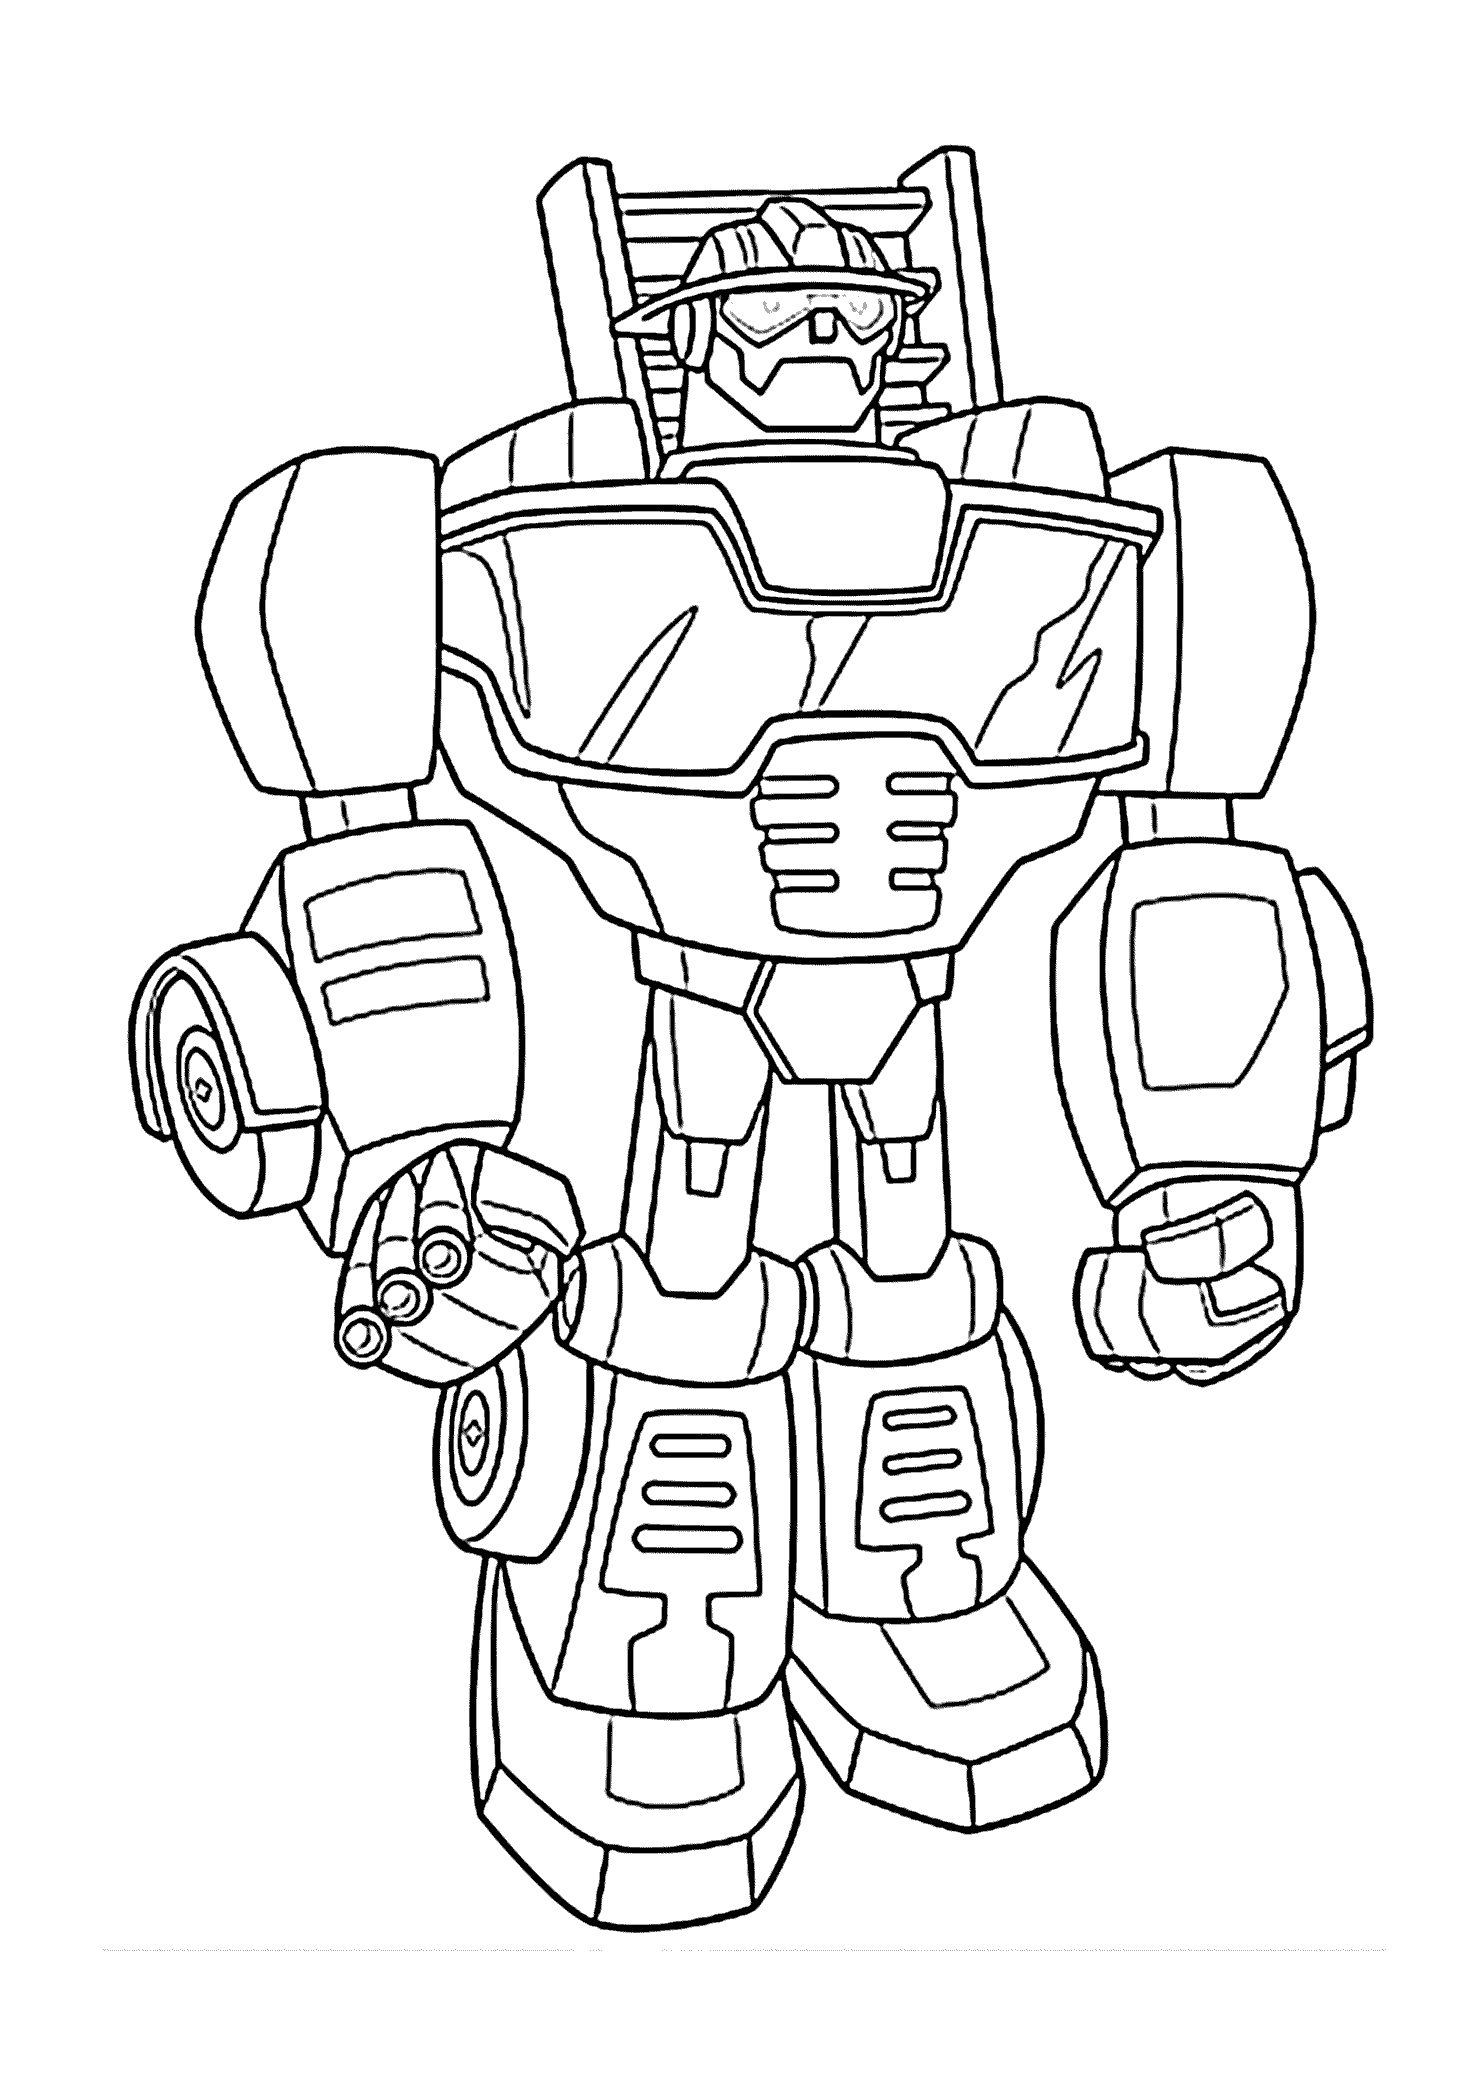 Rescue bots, Coloring pages for kids and Coloring pages